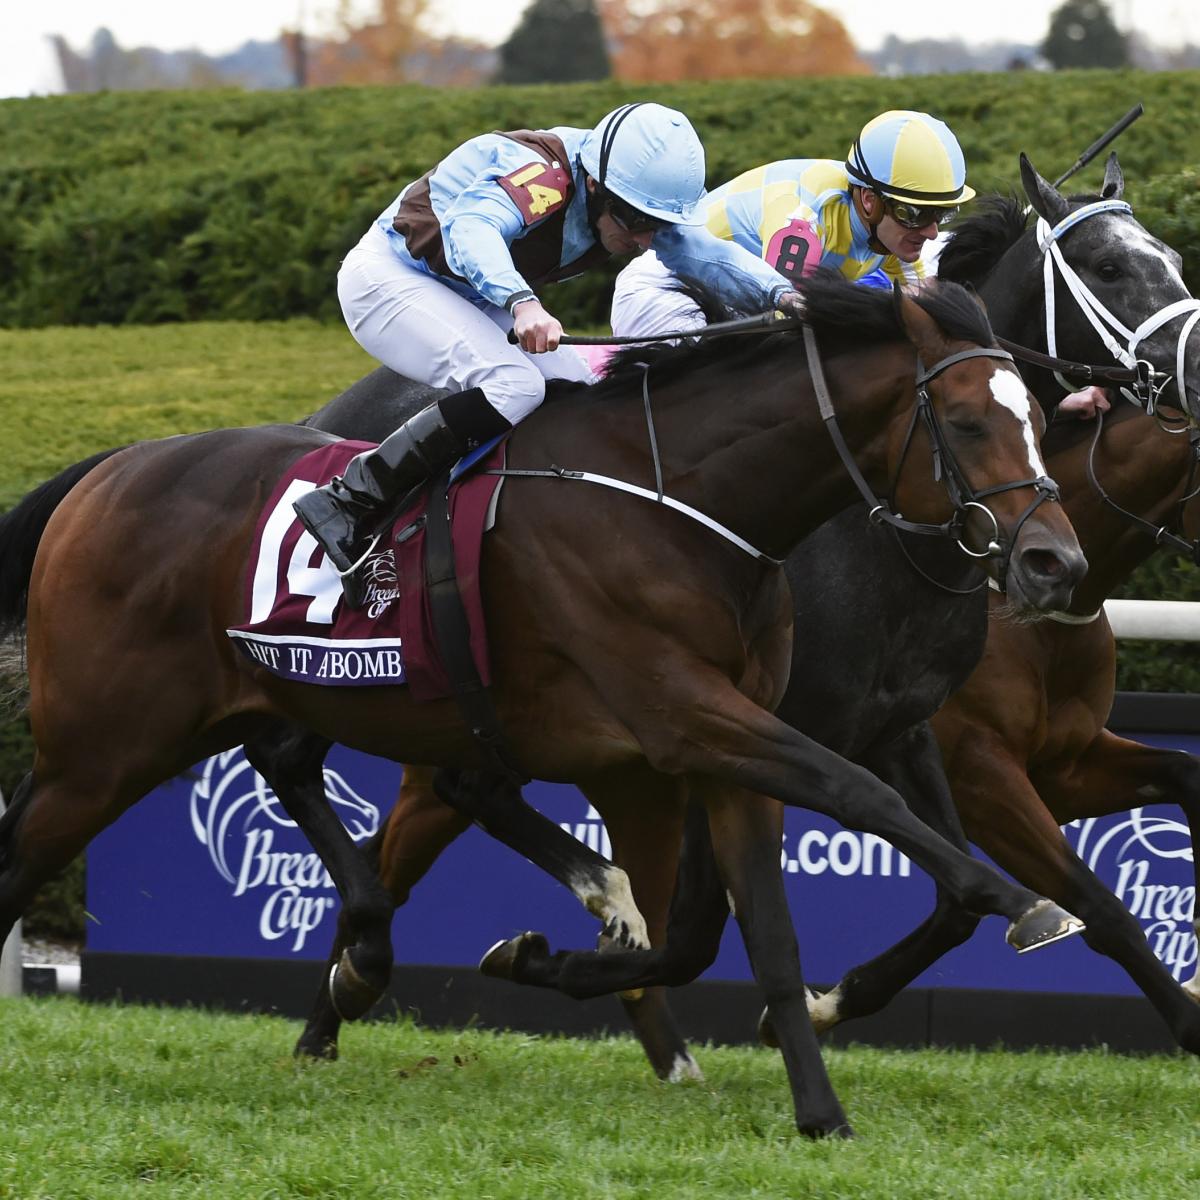 Breeders' Cup 2015 Results Tracking Winners, Prize Money Payouts on